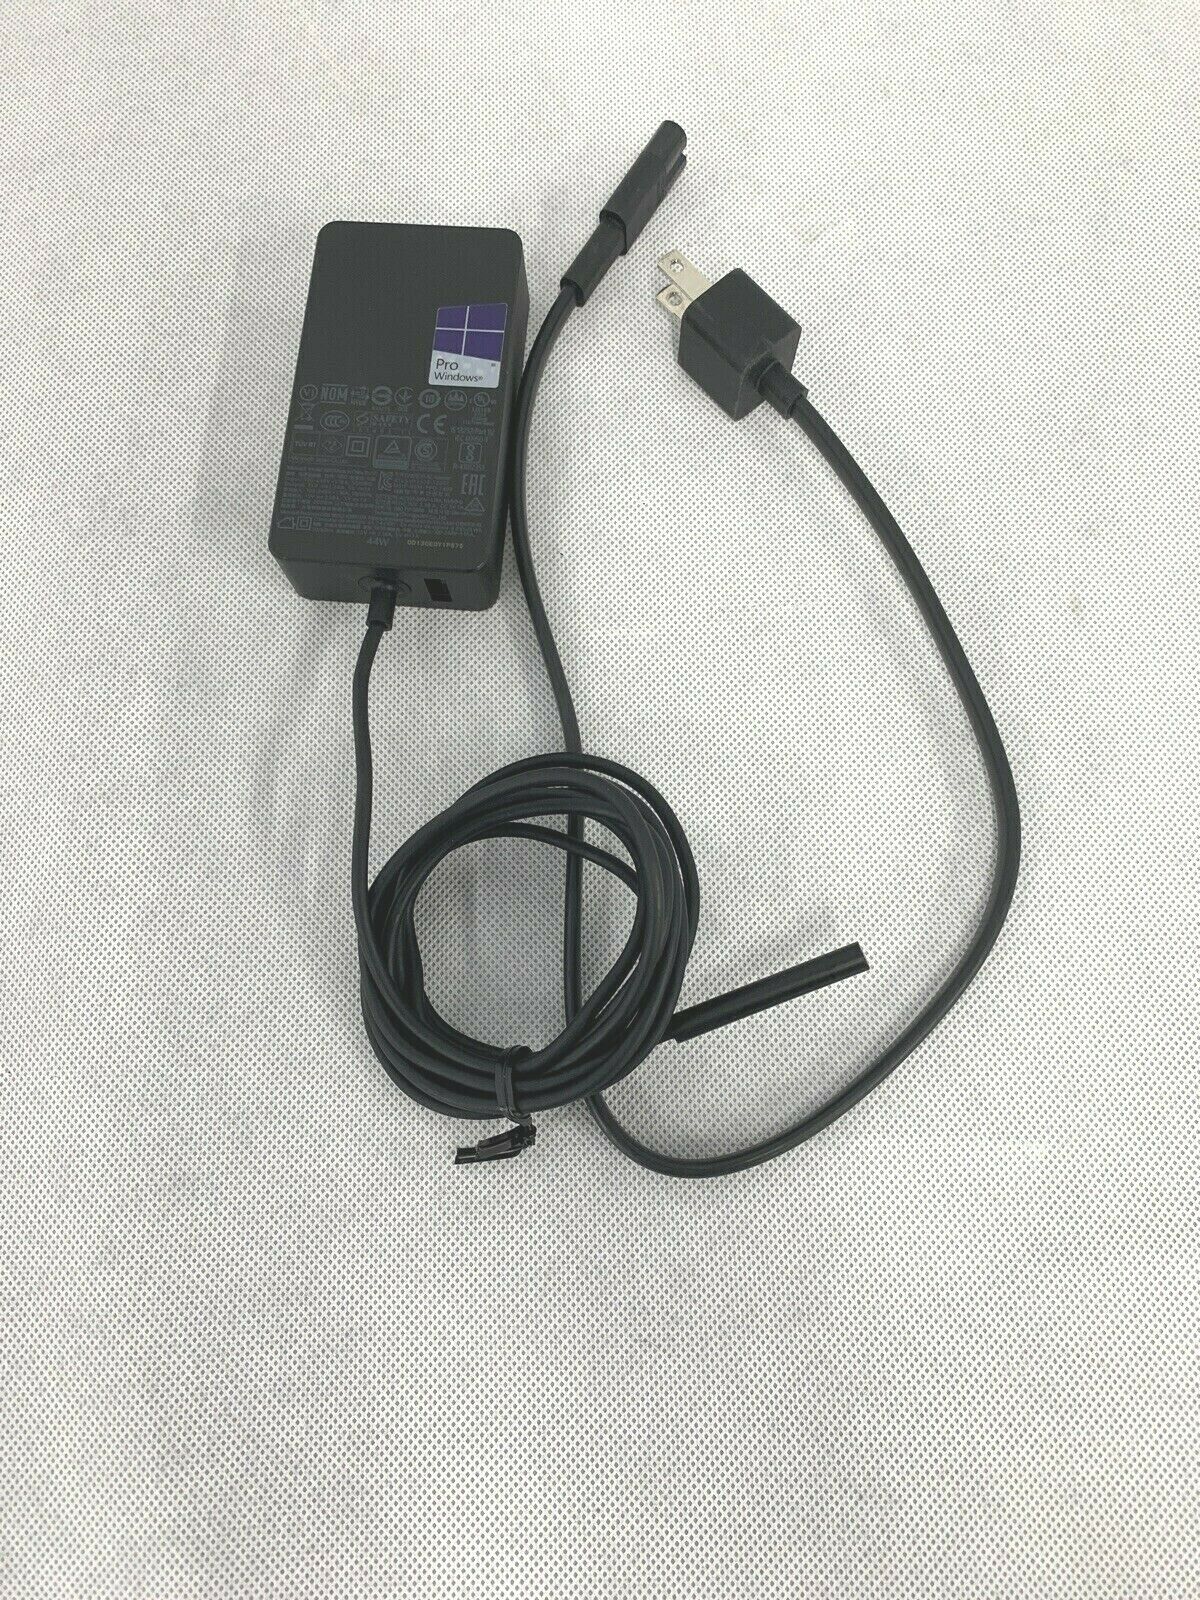 Genuine Microsoft Surface Pro 3 4 5 6 Charger Model 1800 15V 44W Compatible Bran